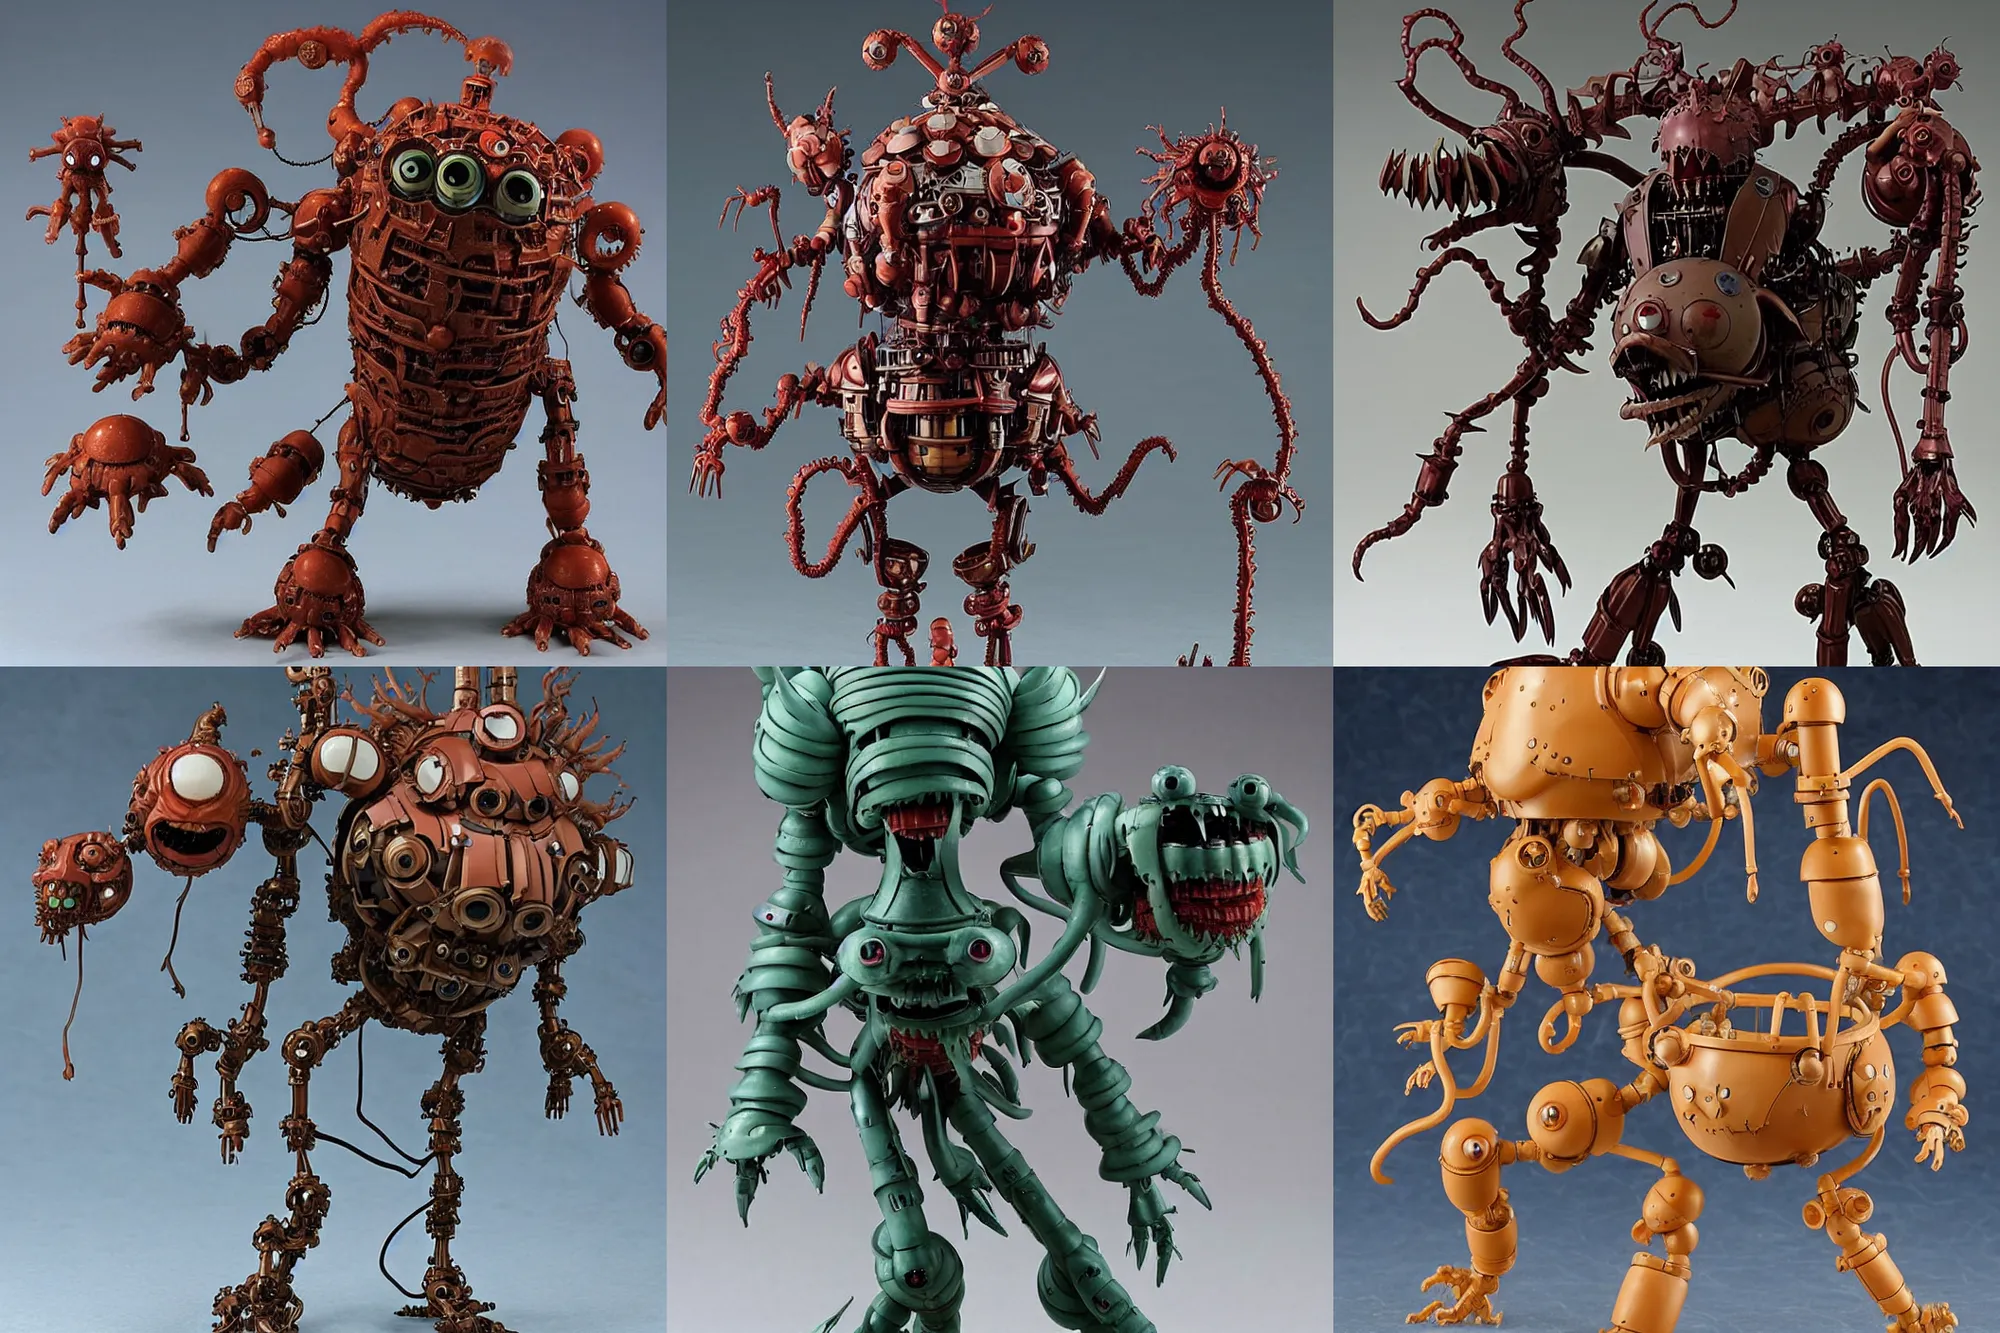 Prompt: A Lovecraftian scary giant mechanized adorable God from the Bible from Studio Ghibli Howl's Moving Castle (2004) as a 1980's Kenner style action figure, 5 points of articulation, full body, 4k, highly detailed. award winning sci-fi. look at all that detail!